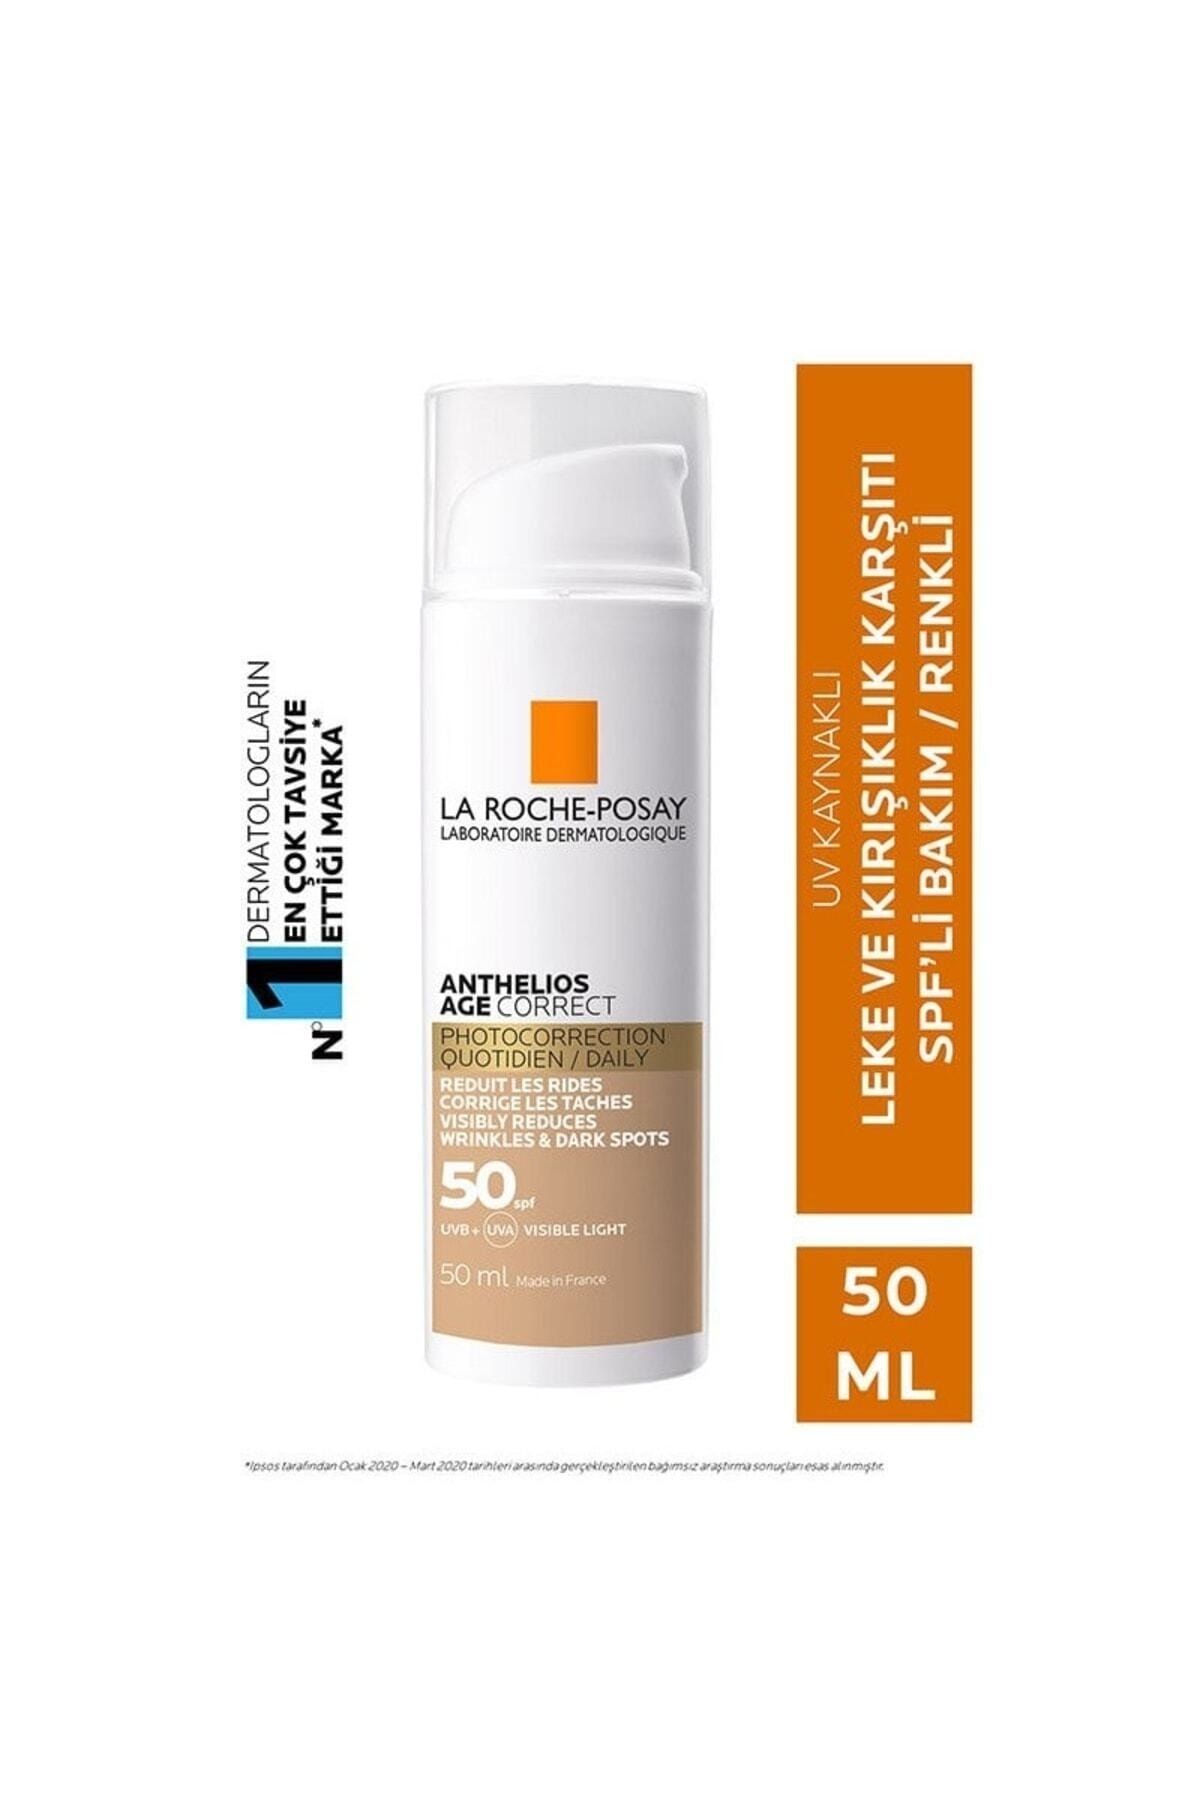 La Roche Posay Anthelios Age Correct Spf 50 Anti-Spot And Wrinkle Tinted Sun Cream 50 Ml